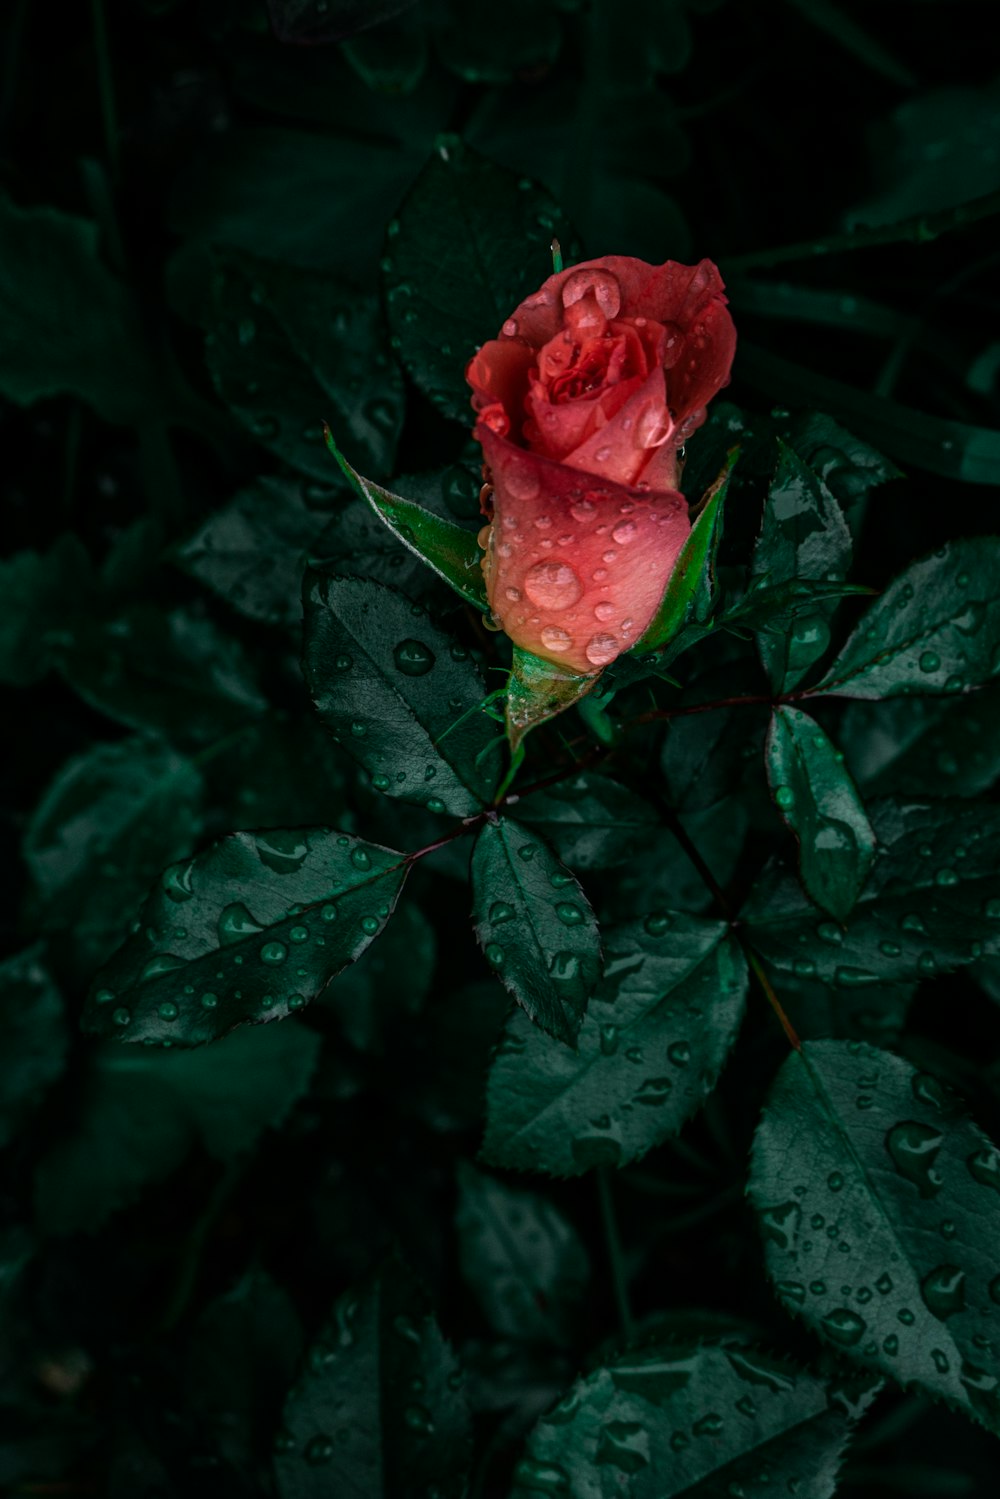 a single red rose with water droplets on it